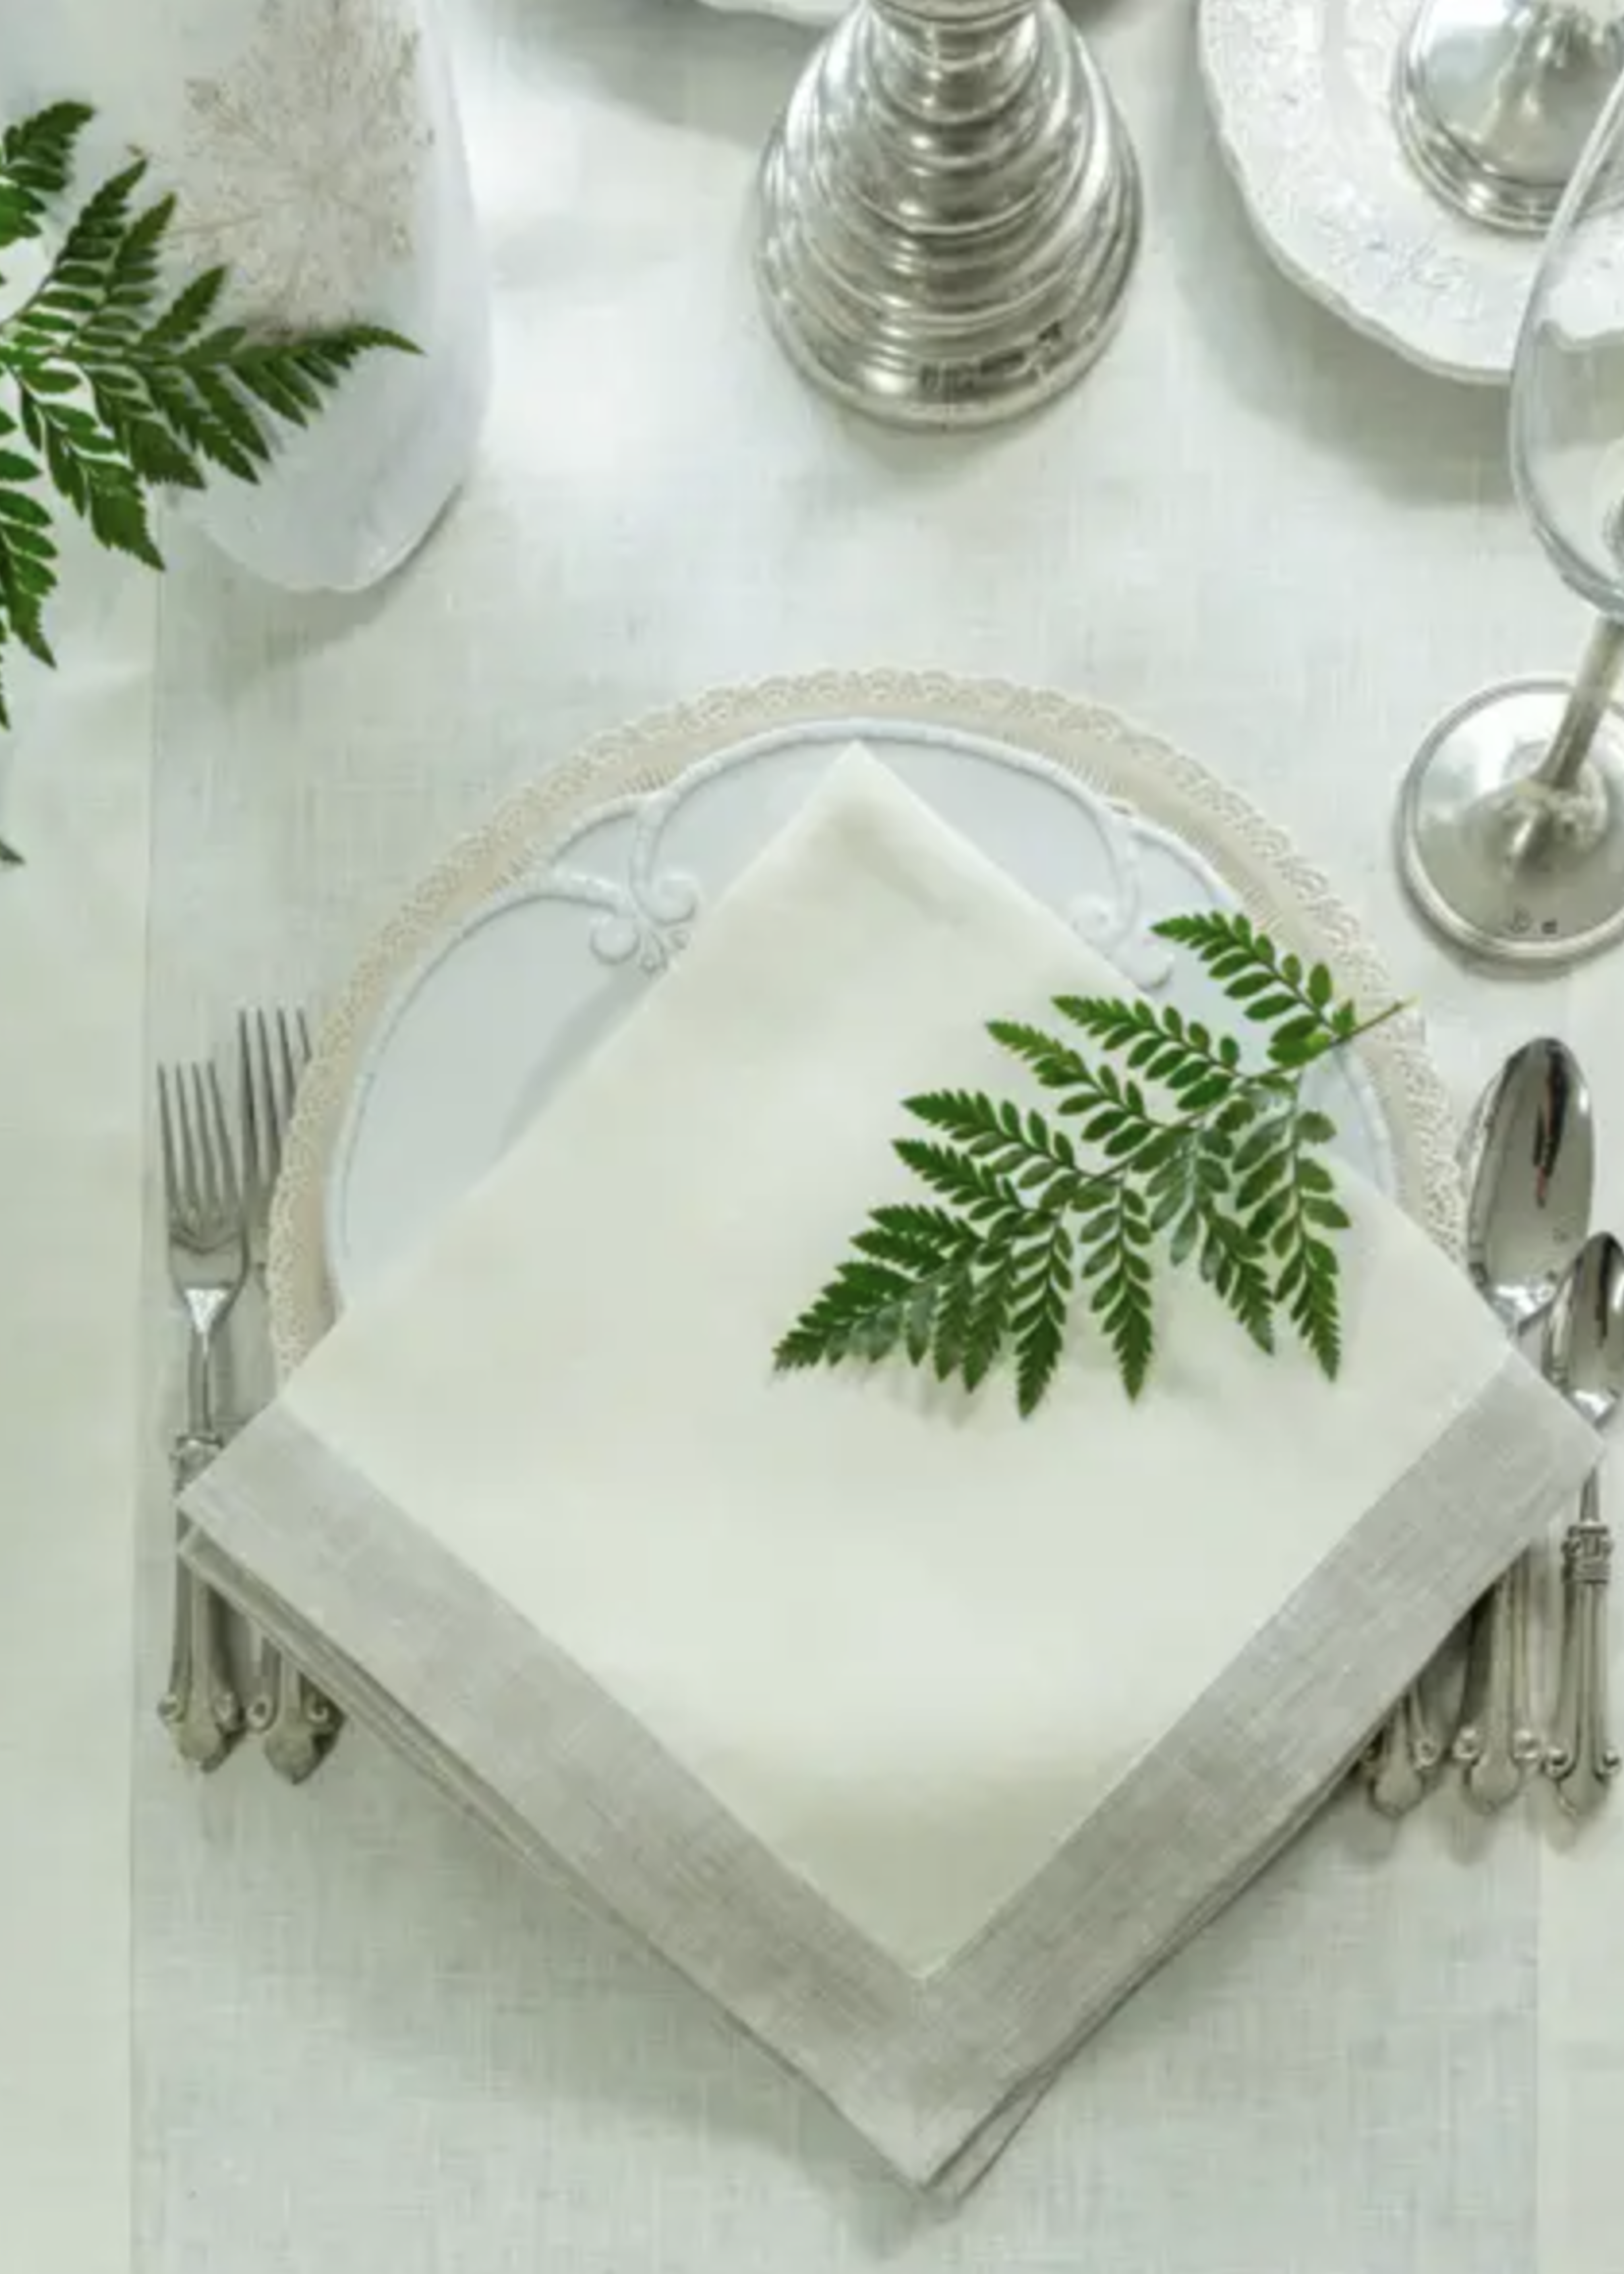 Crown Linen Designs Cream with Flax Frame Large Napkin